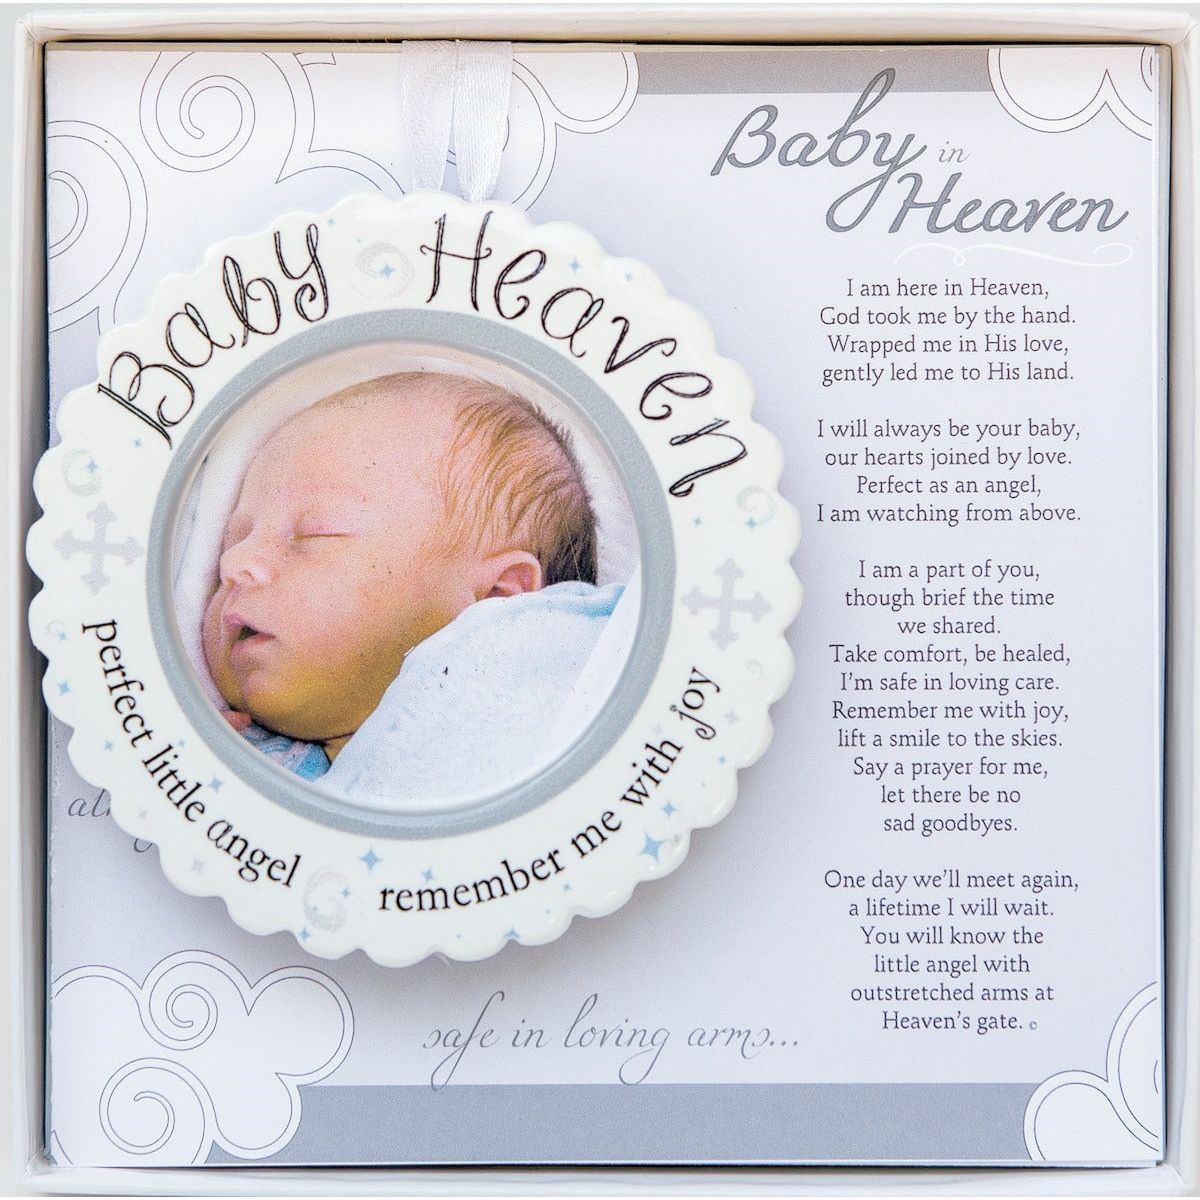 3" Scalloped Ceramic Baby Heaven Infant Memorial Ornament which holds 2.25 Round Sonogram Image or Photo with Ribbon for Hanging.  Ornament is gift boxed with "Baby Heaven" poem folding card in a white 5.5"x5.5" box with a clear lid.